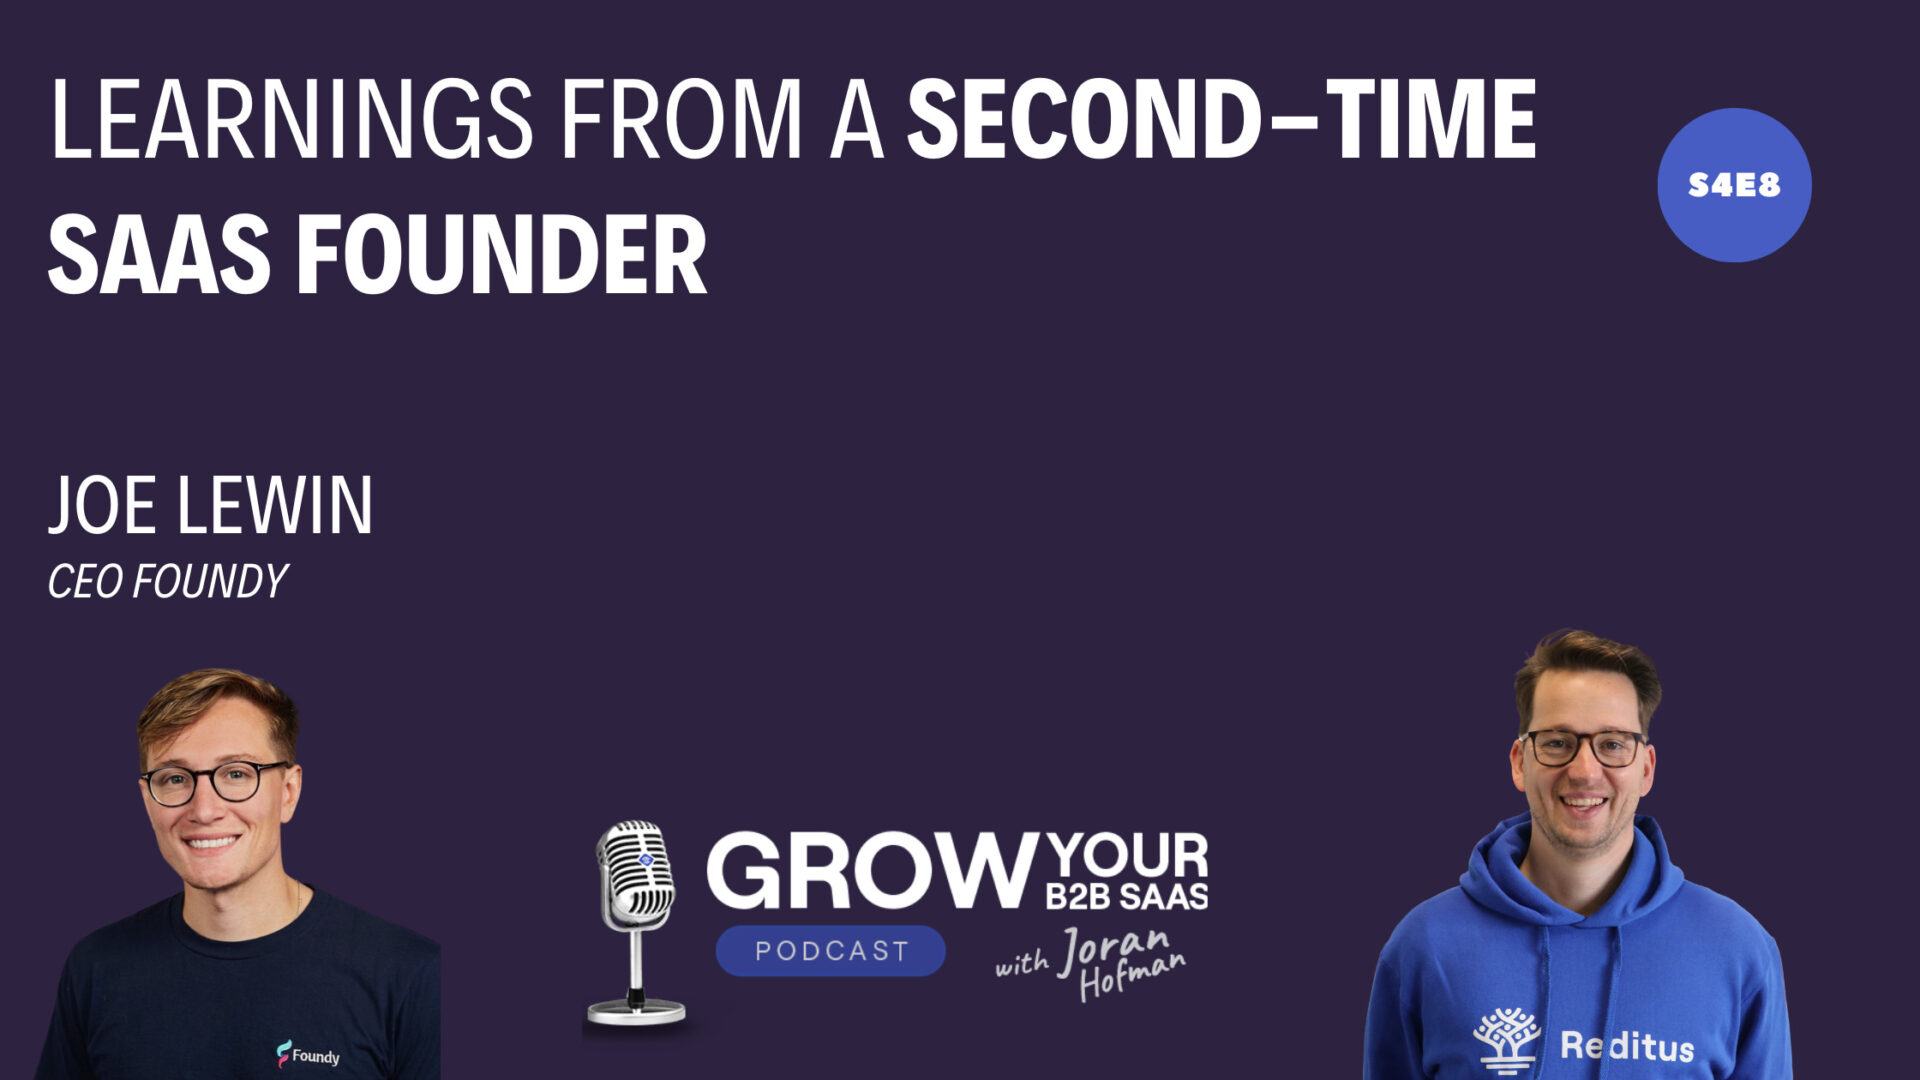 https://www.getreditus.com/podcast/s4e8-learnings-from-a-second-time-saas-founder-with-joe-lewin/